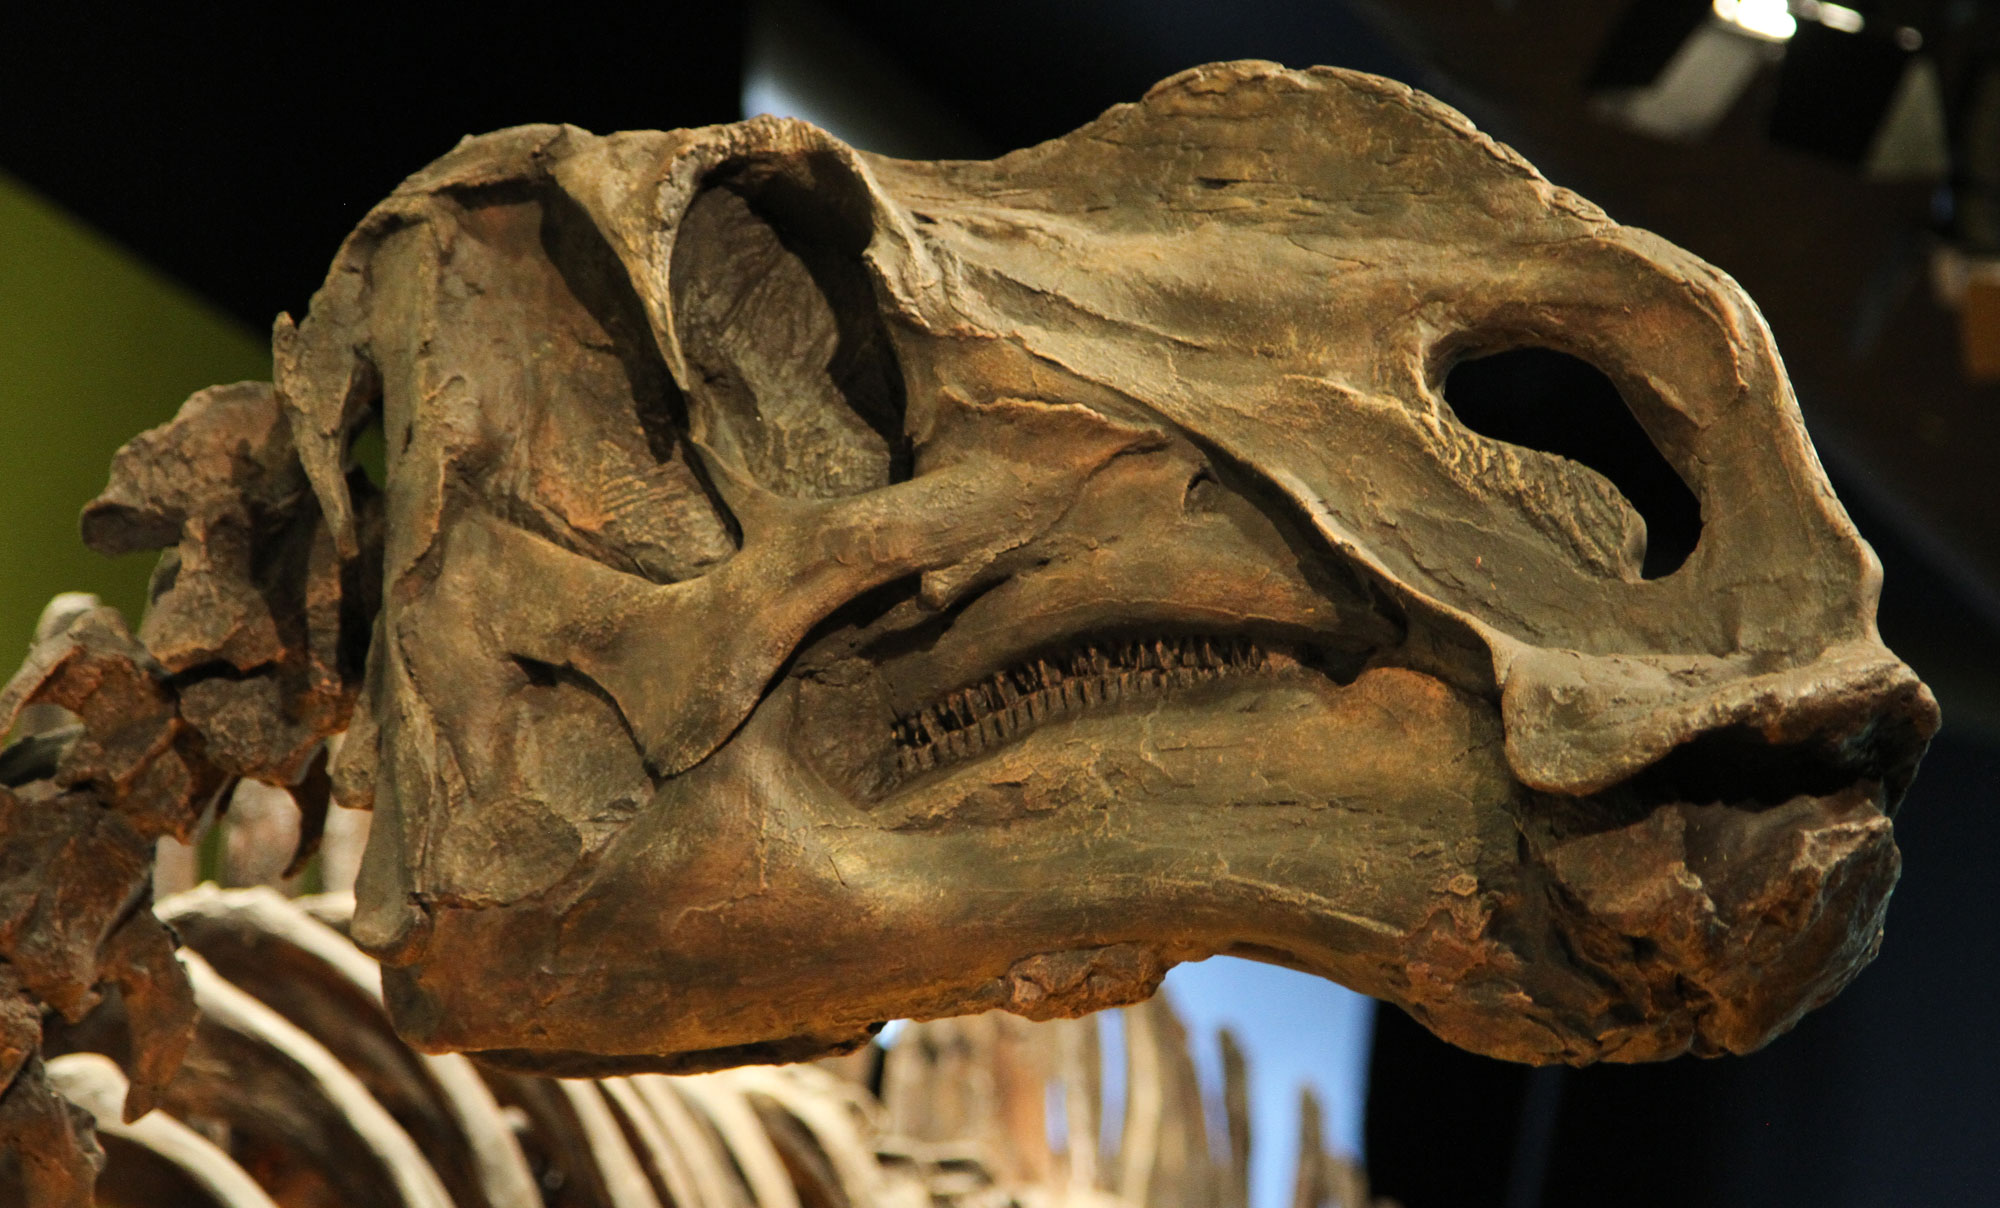 Photograph of the skull of Hadrosaurus foulkii from New Jersey. The photo shows the skull of a herbivorous dinosaur.